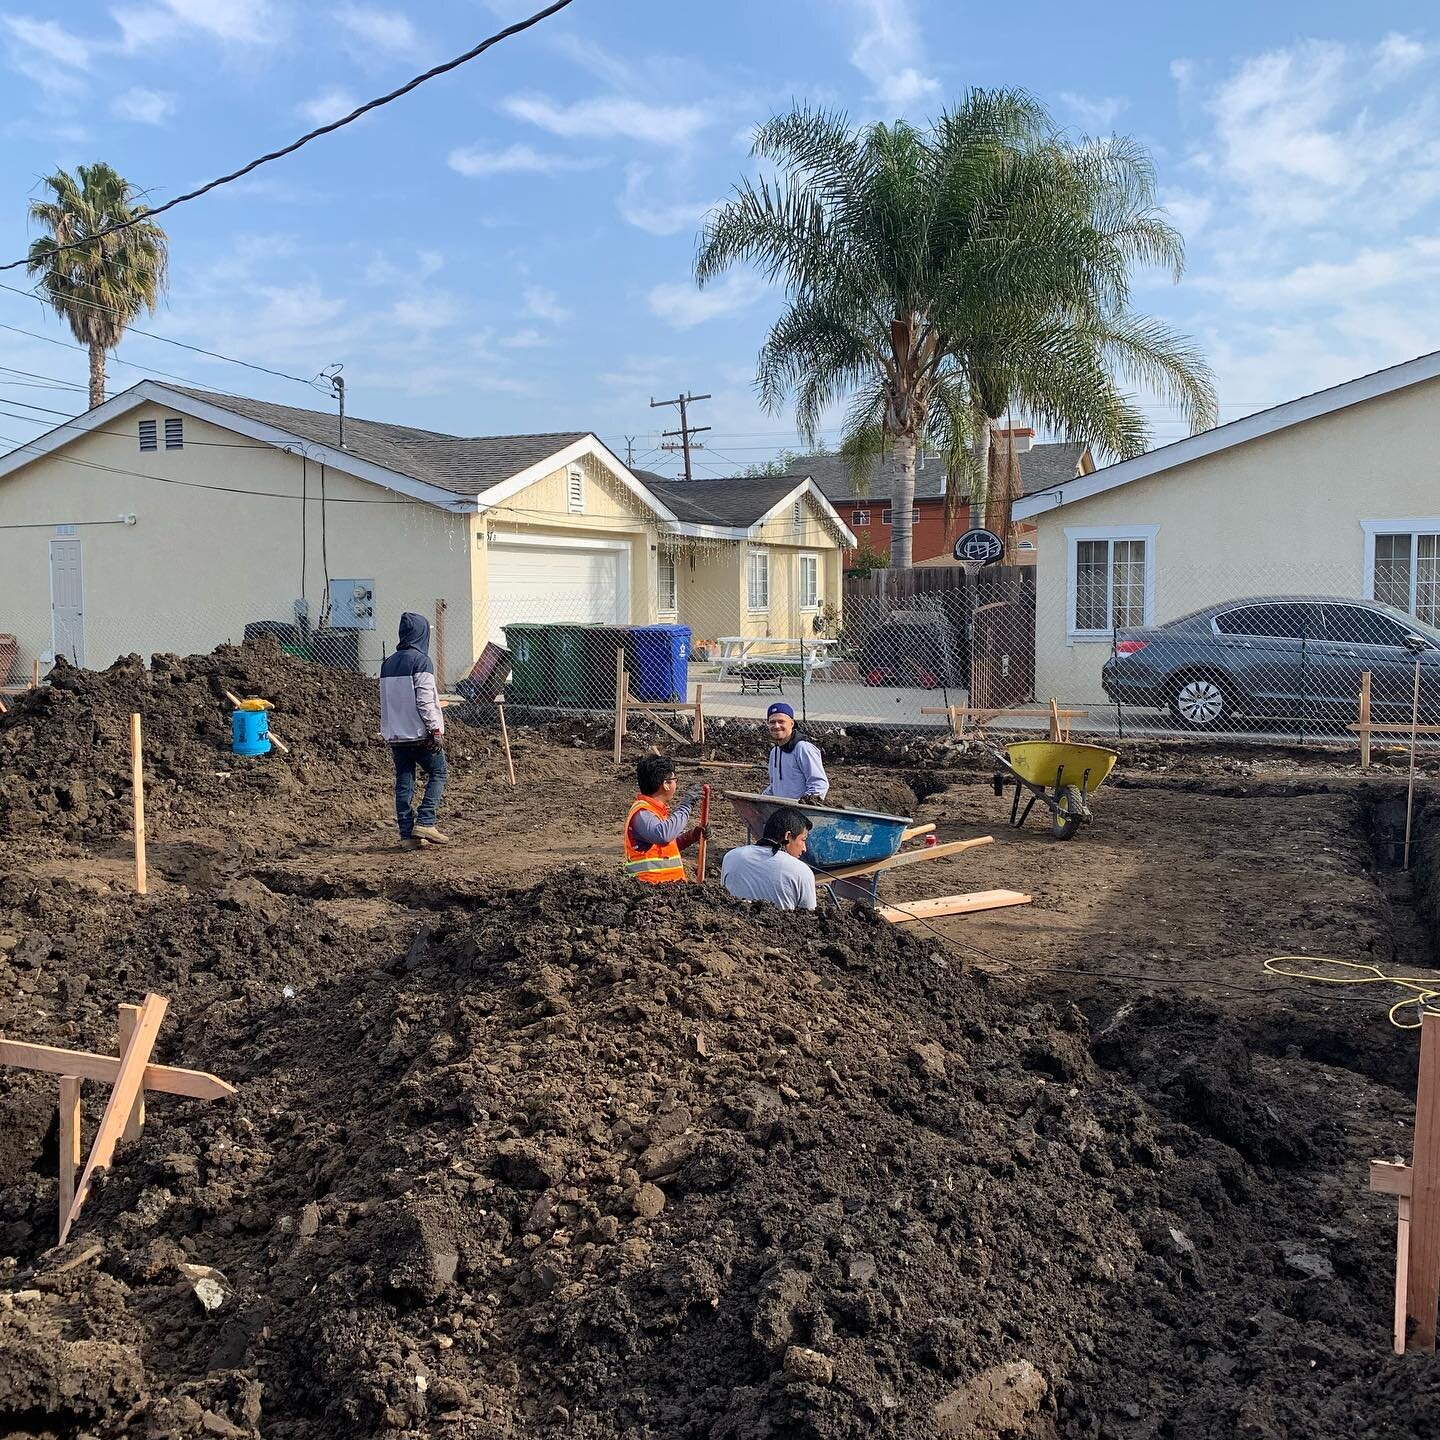 Boys are having fun in Hawthorne. Working on this addition foundation. Next will be the foundation for the detached ADU. #builder #foundation #concrete #generalcontractor #adu #developer